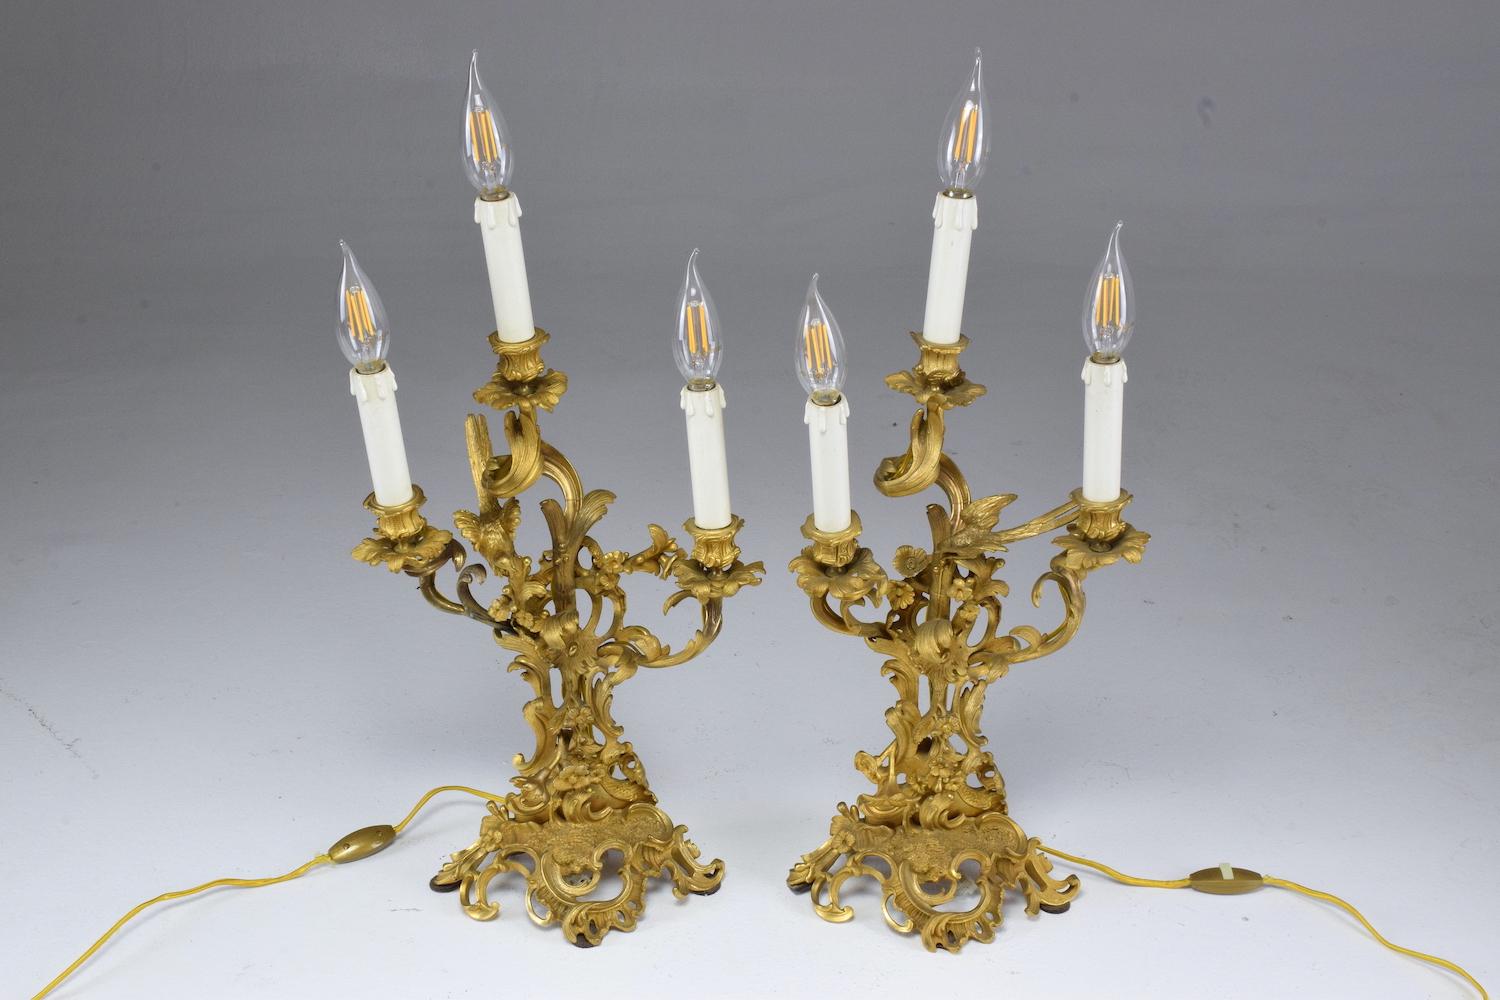  French Pair of Antique Louis VXI Ormolu Electrified Candelabras  1